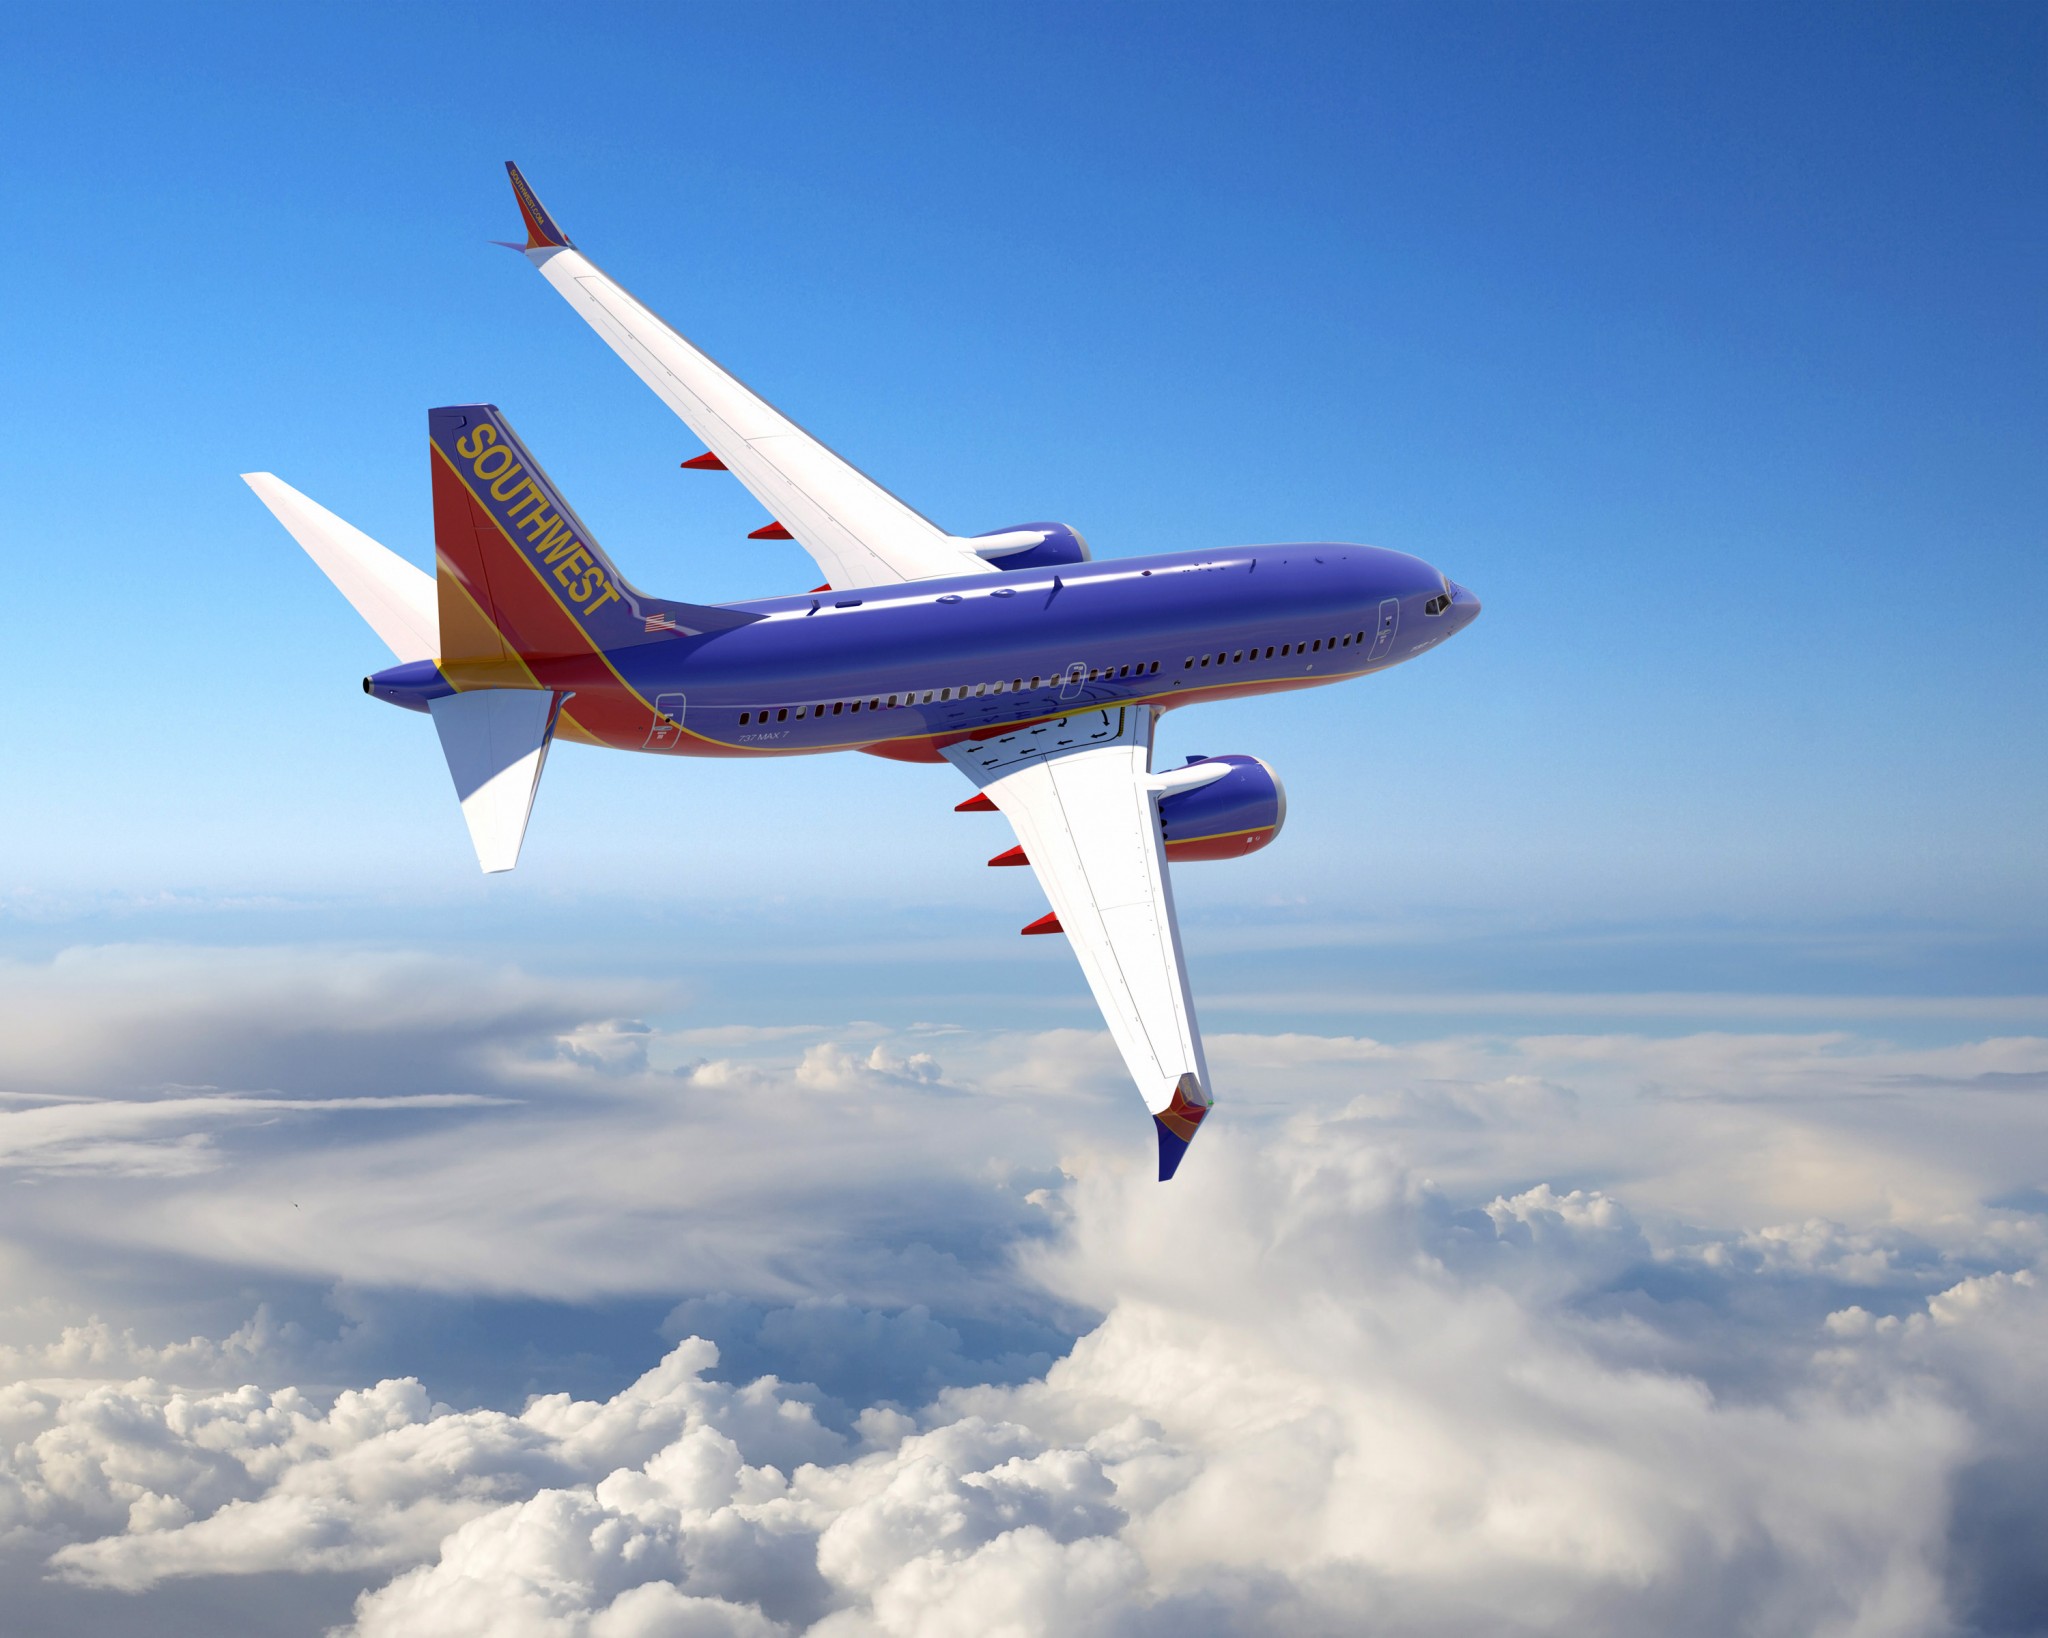 Southwest Airlines reports January traffic